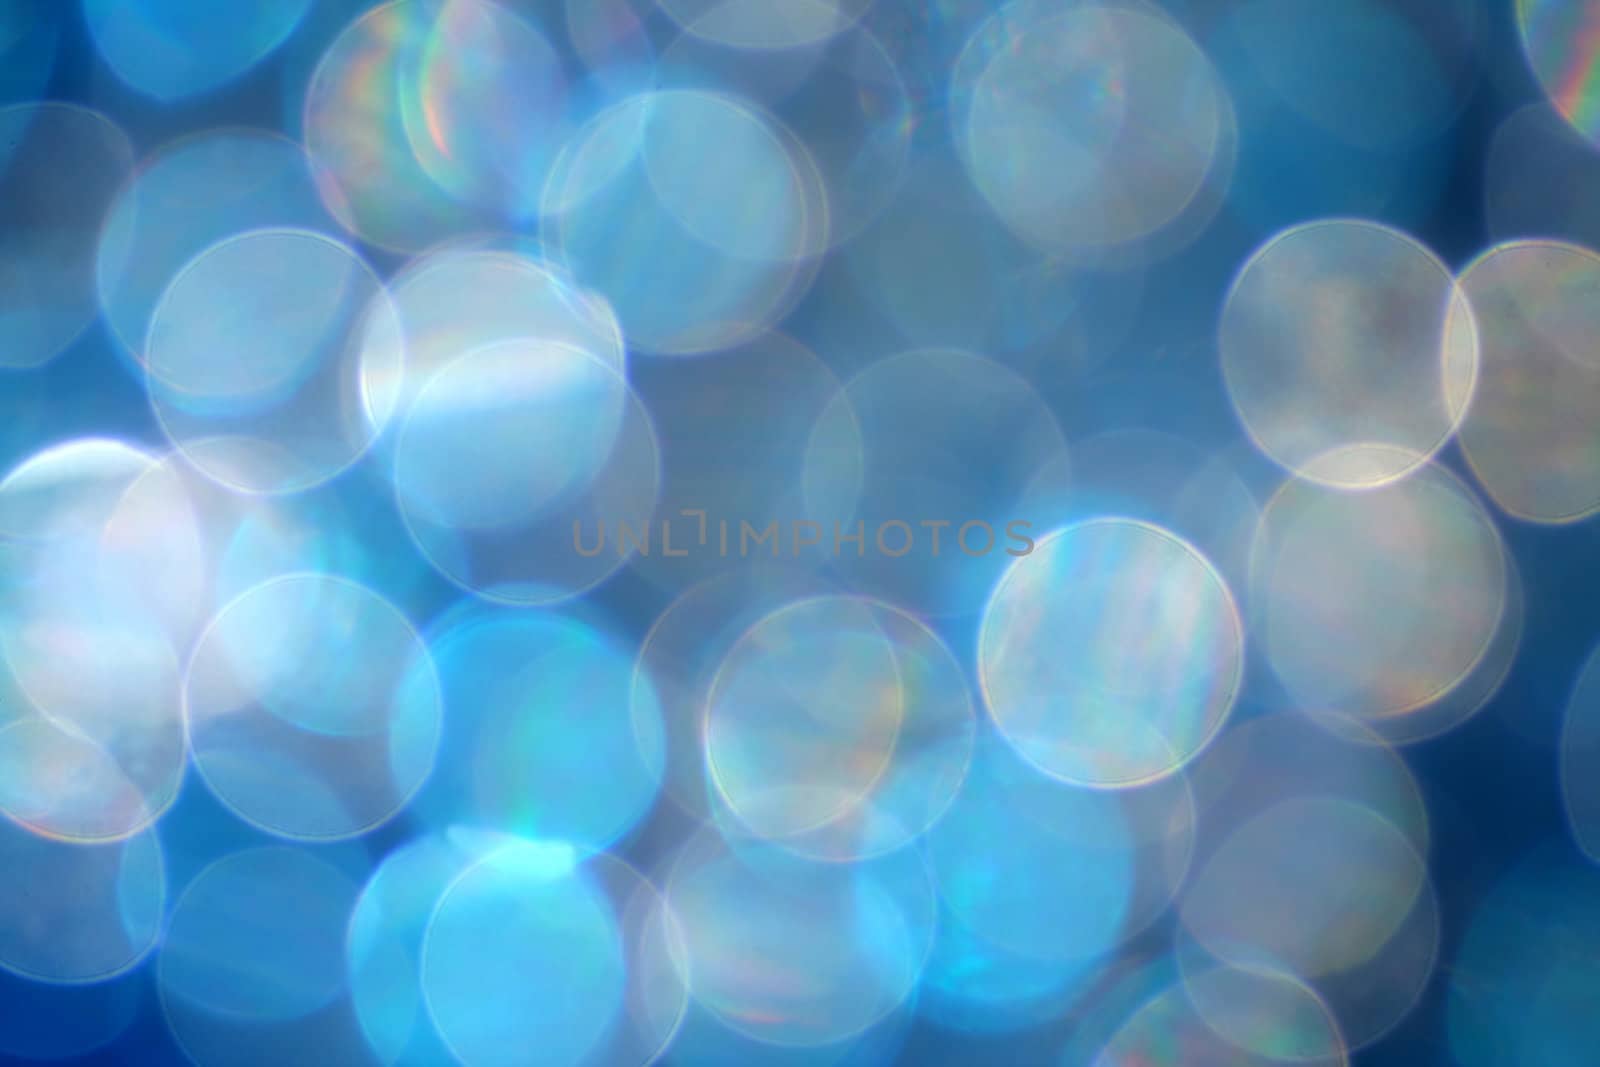 A bokeh background perfect for the holidays.